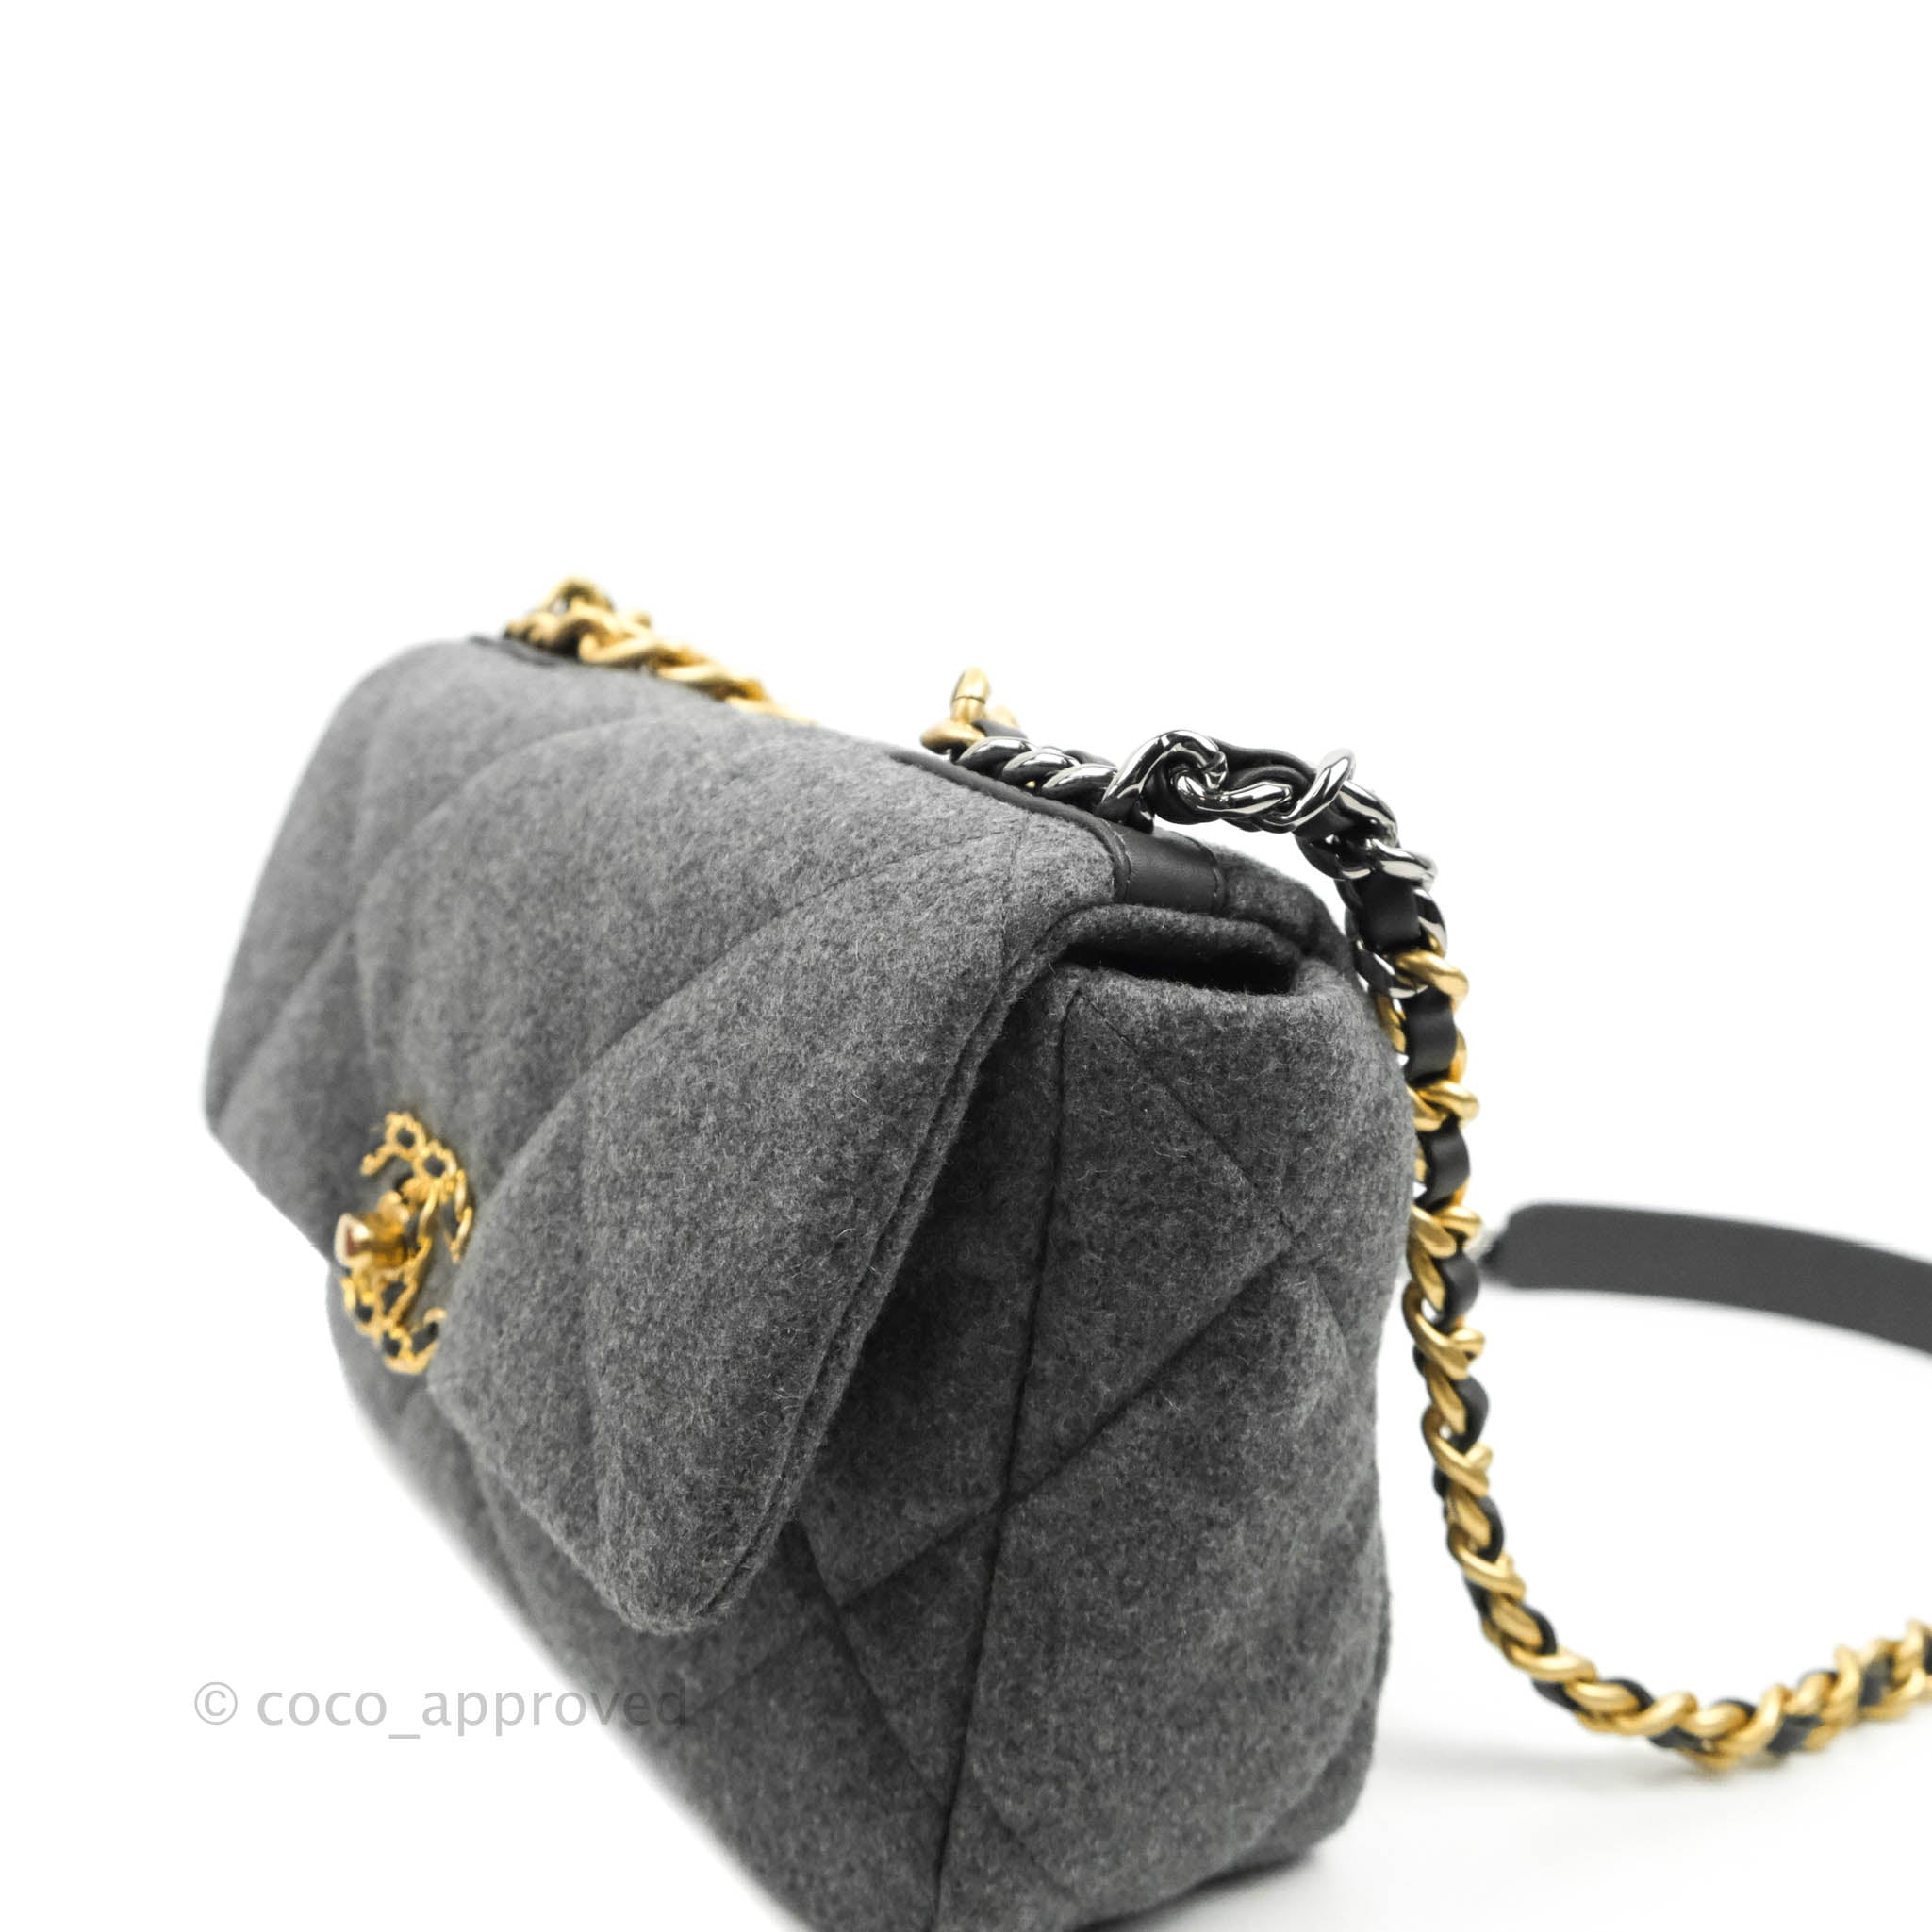 3D model Chanel 19 Bag Vintage Gray Fabric VR / AR / low-poly